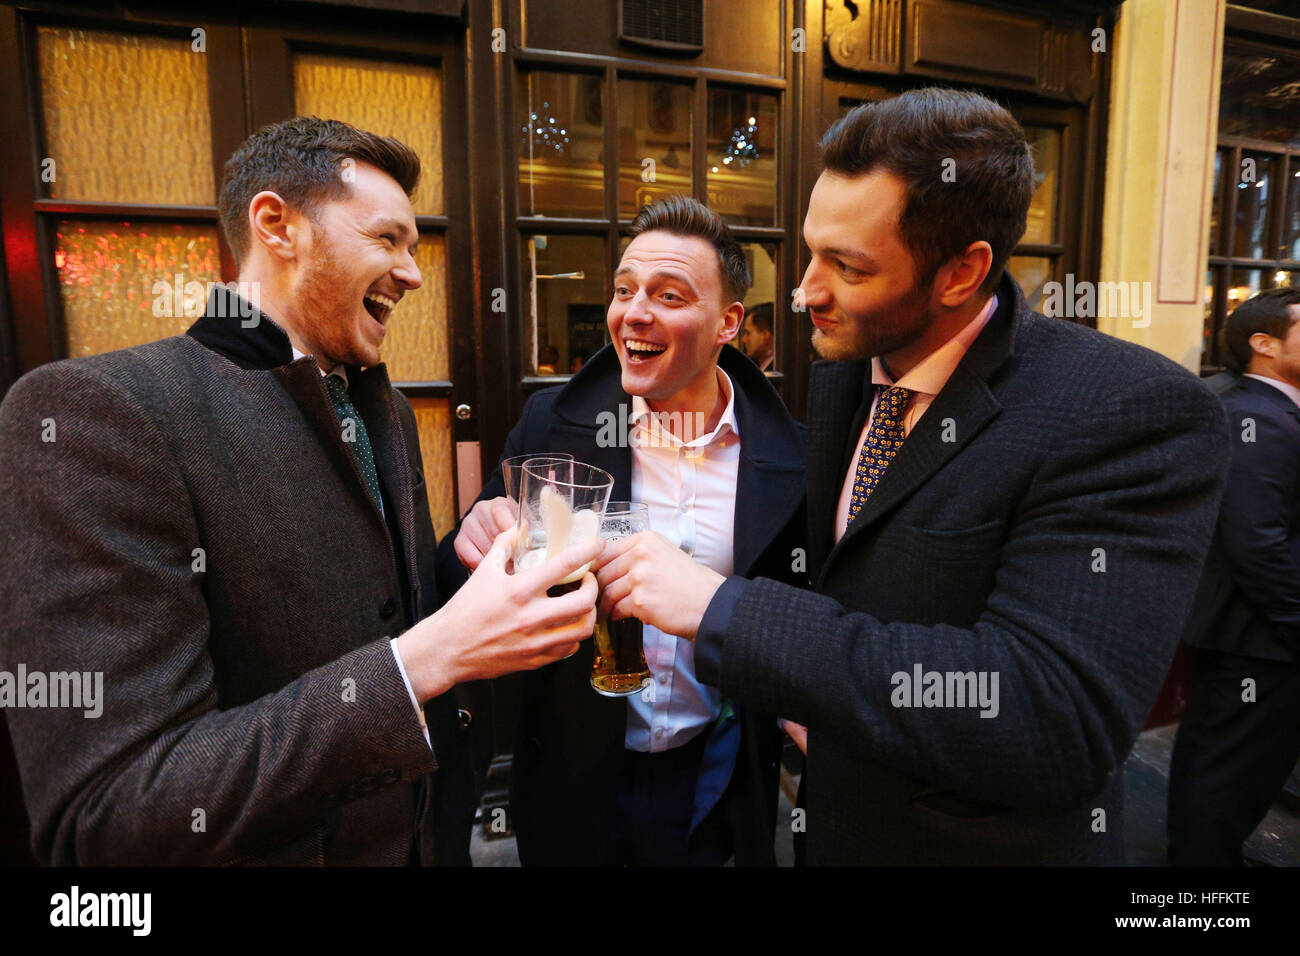 City workers (no names available) celebrate at the New Moon public house in Leadenhall Market, in the financial district of London, after the FTSE 100 index surged to an all-time high and recorded its best year since 2013. Stock Photo